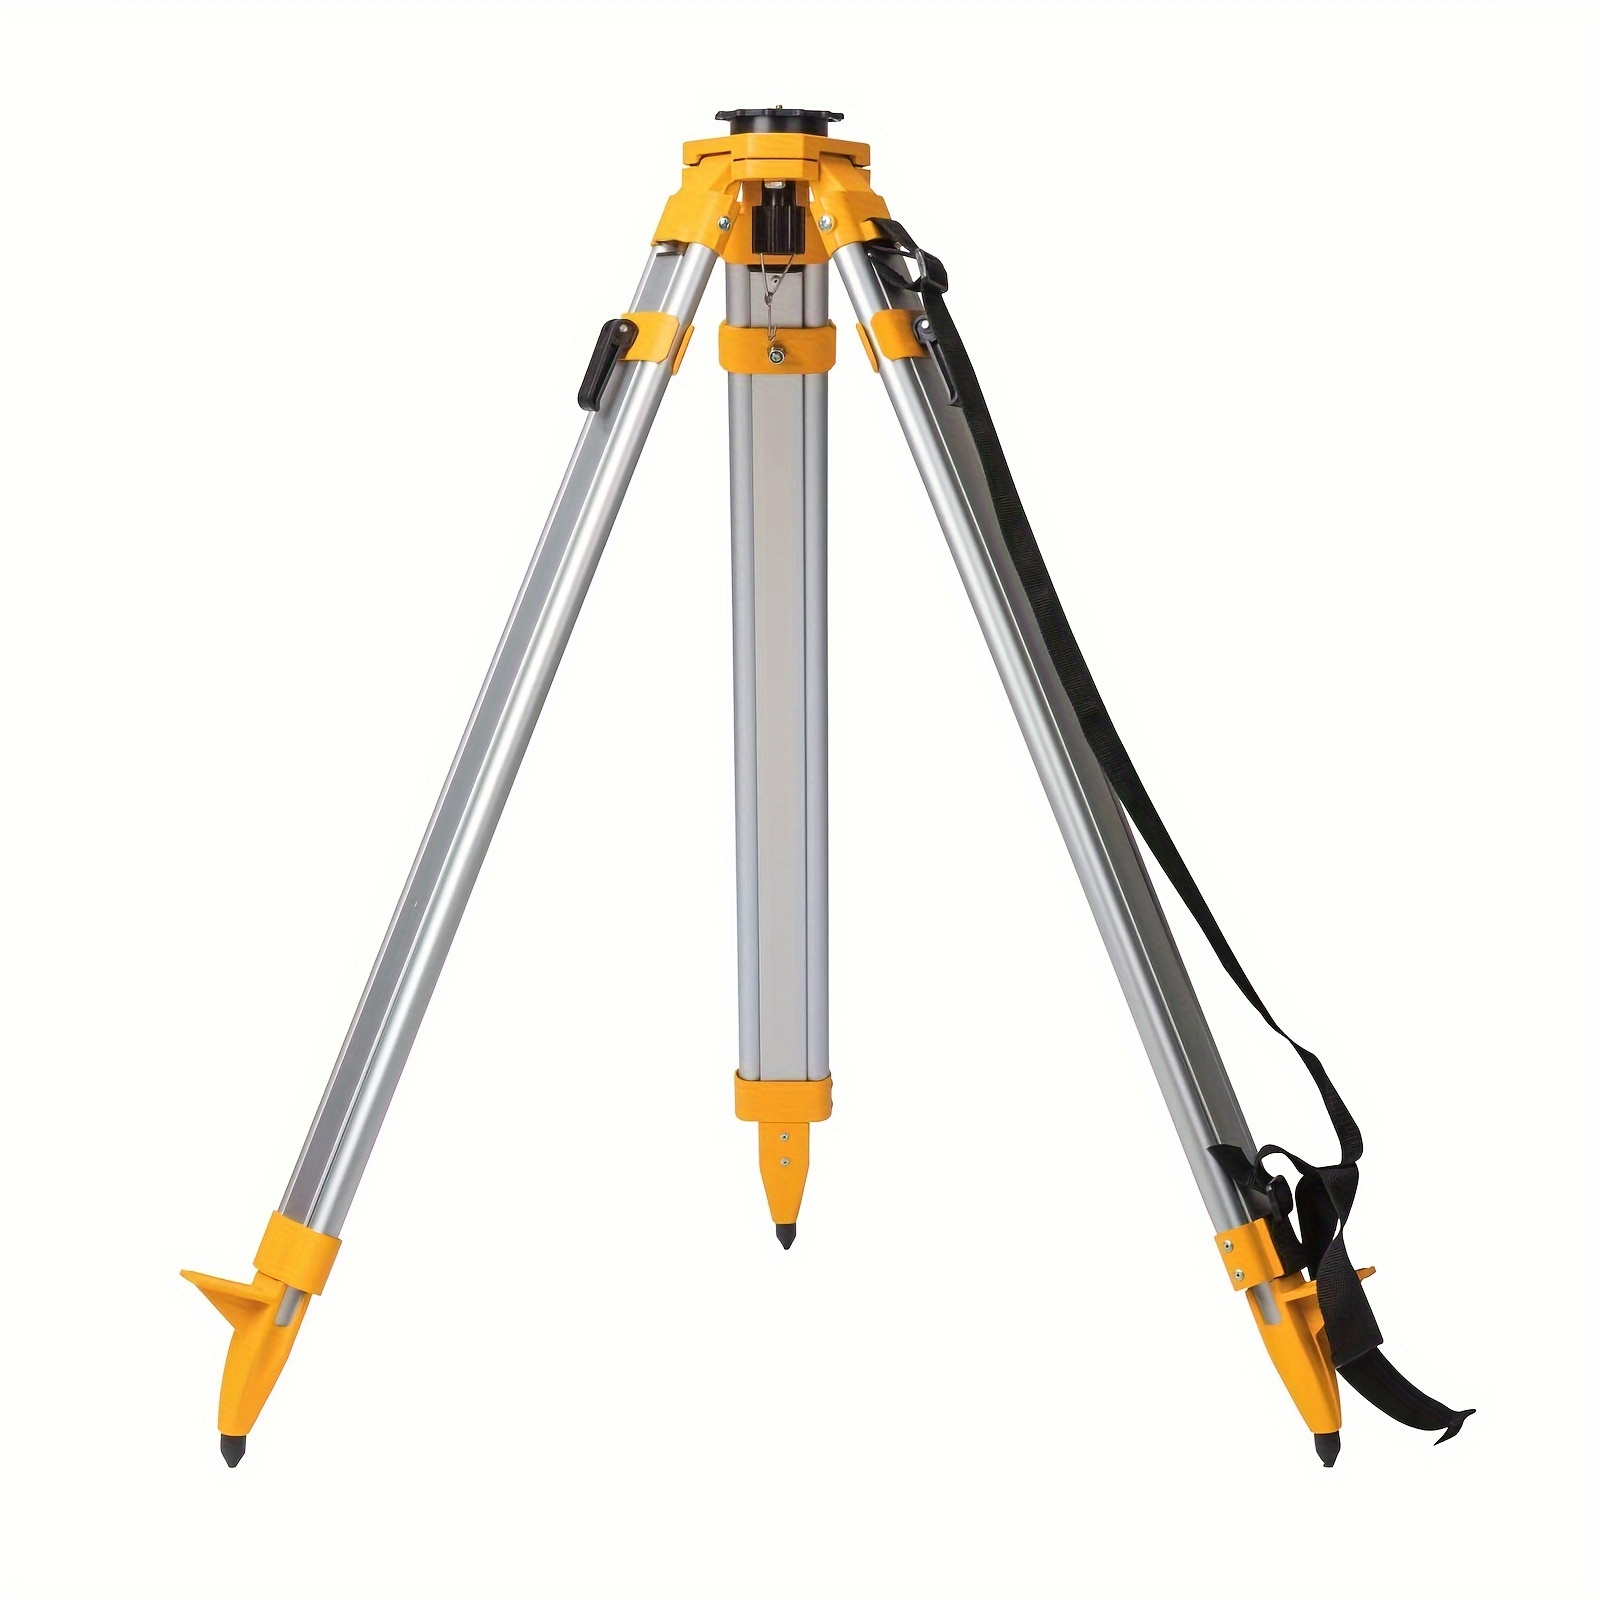 

Ostart Aluminum Tripod With Adjustabe Legs, Heavy Duty Contractor Tripod With 5/8"-11 Thread Flat Head Quick Clamp For Auto Level Optical Theodolite, Adjustable Height: 38"-60